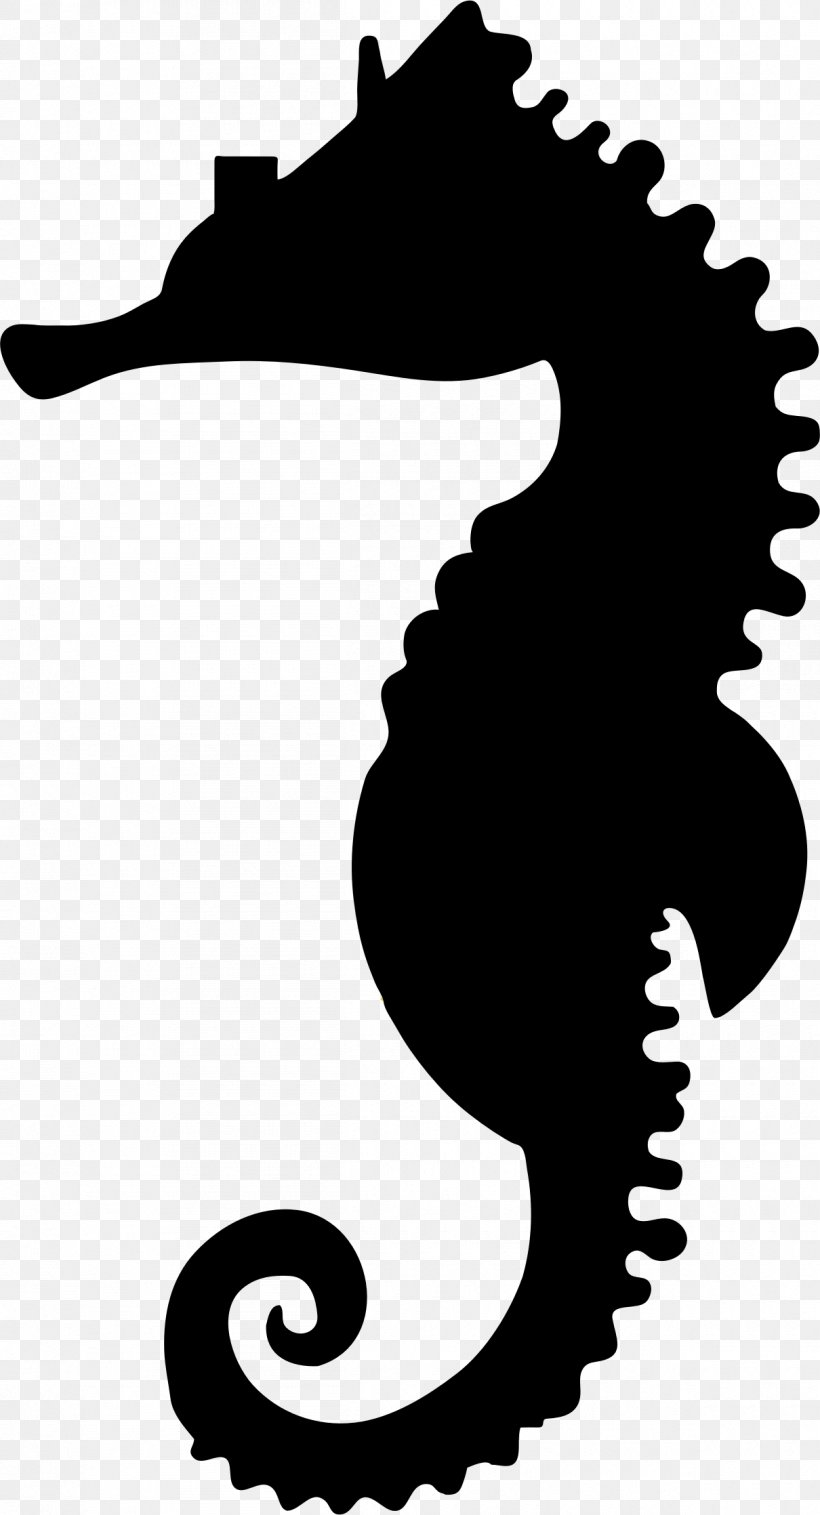 Seahorse Silhouette Clip Art, PNG, 1210x2236px, Seahorse, Artwork, Black, Black And White, Fish Download Free